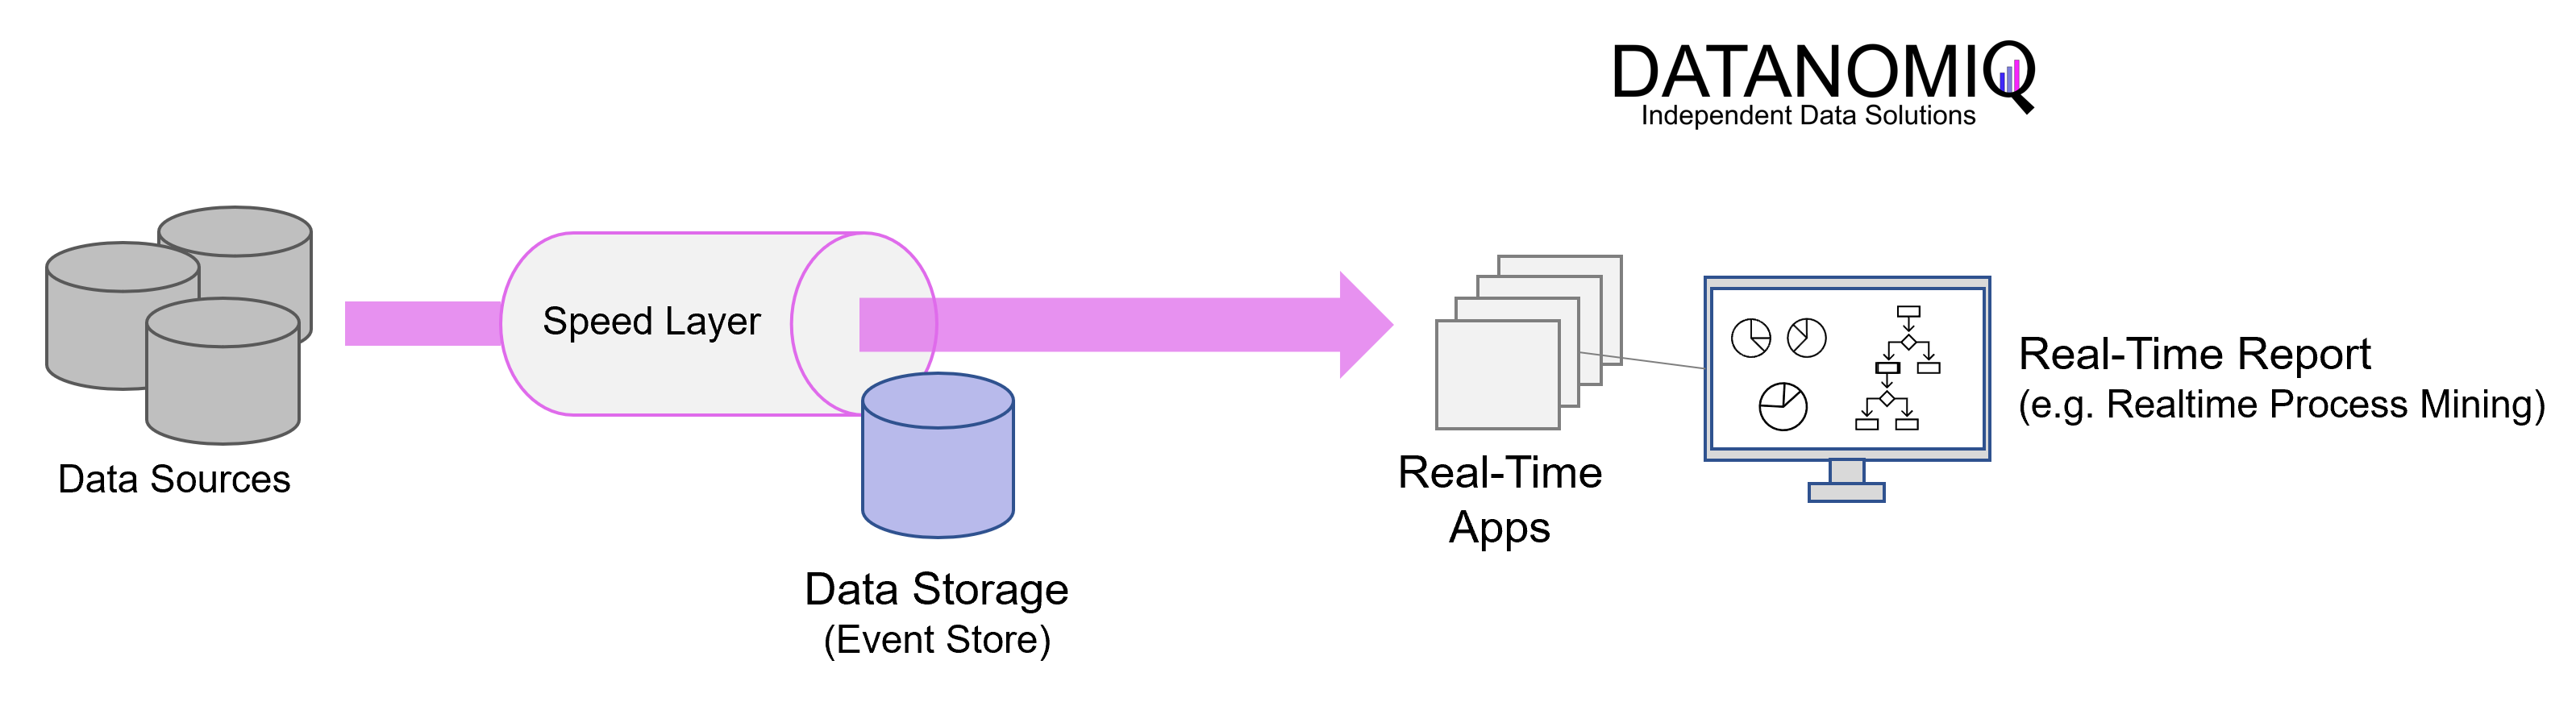 Illustrated simplified Kappa Architecture. This architectural concept relies on event streaming as the core element of data delivery.